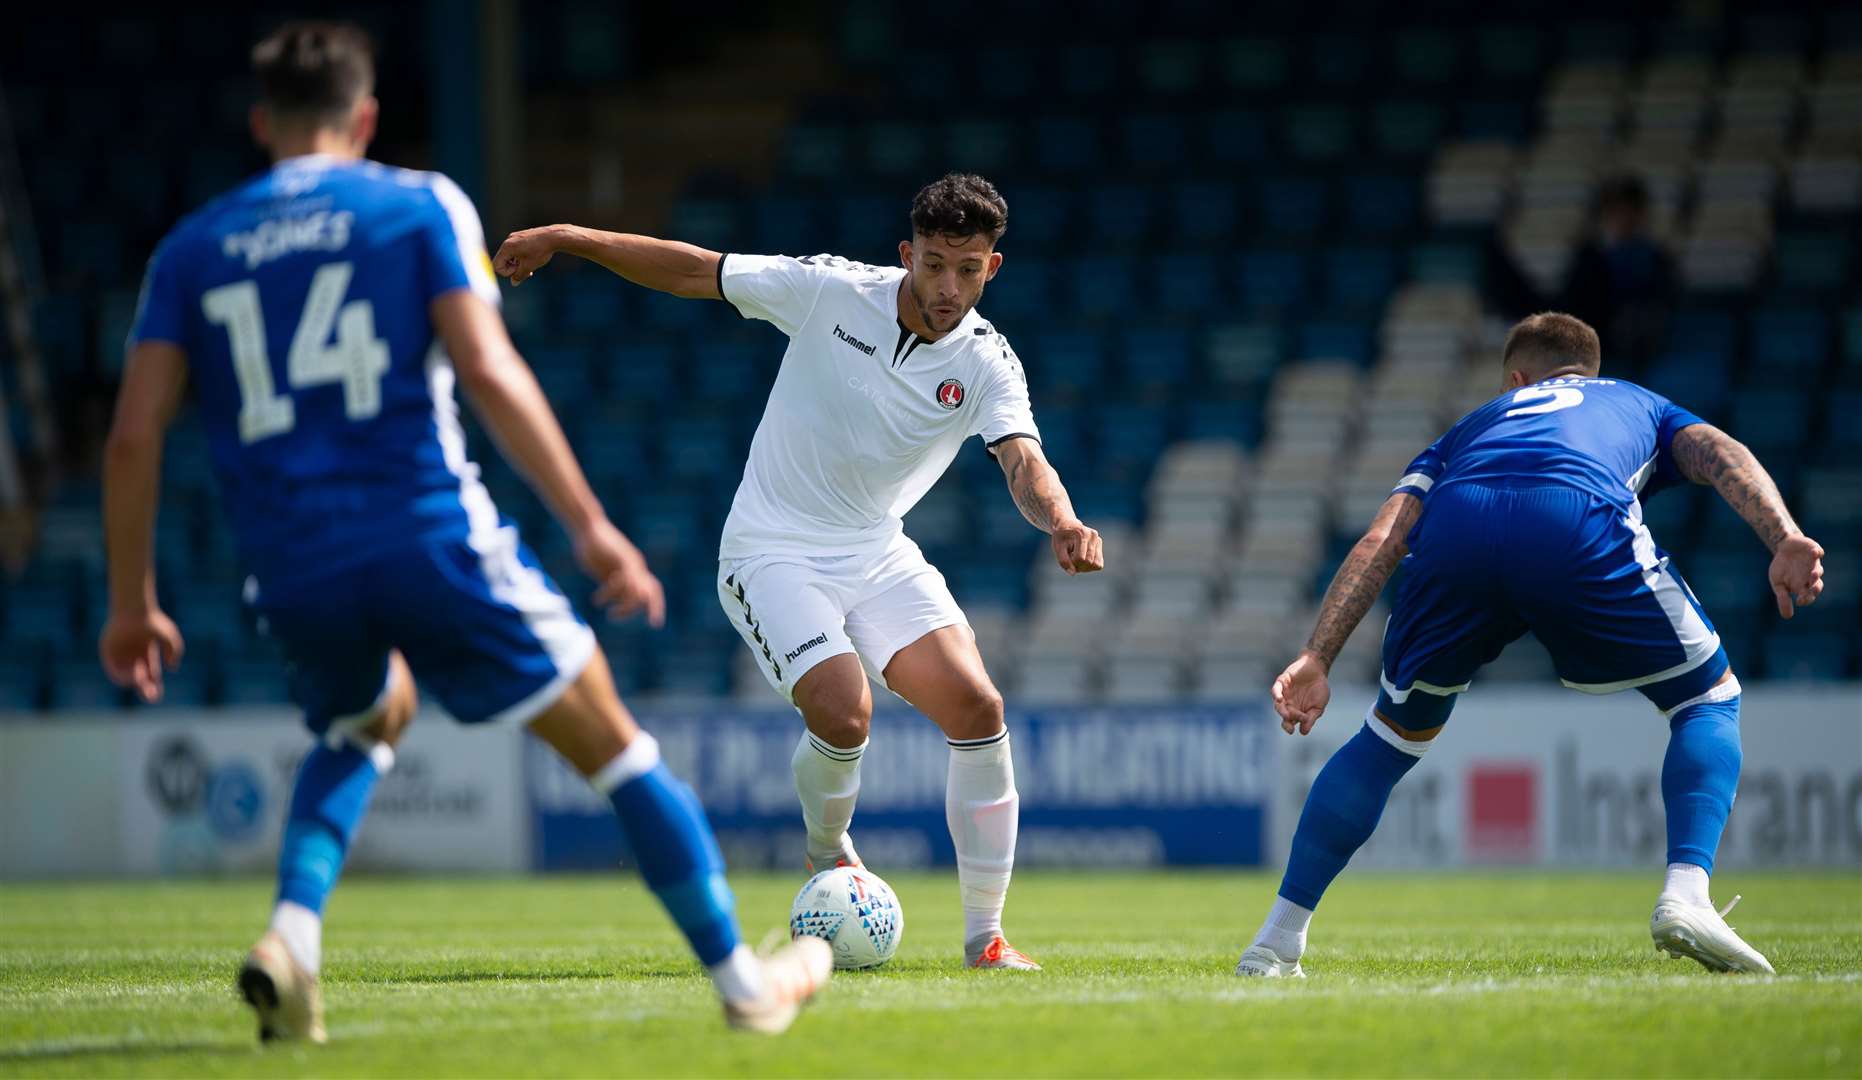 Charlton's Macauley Bonne runs at Gillingham defenders Alfie Jones and Max Ehmer Picture: Ady Kerry